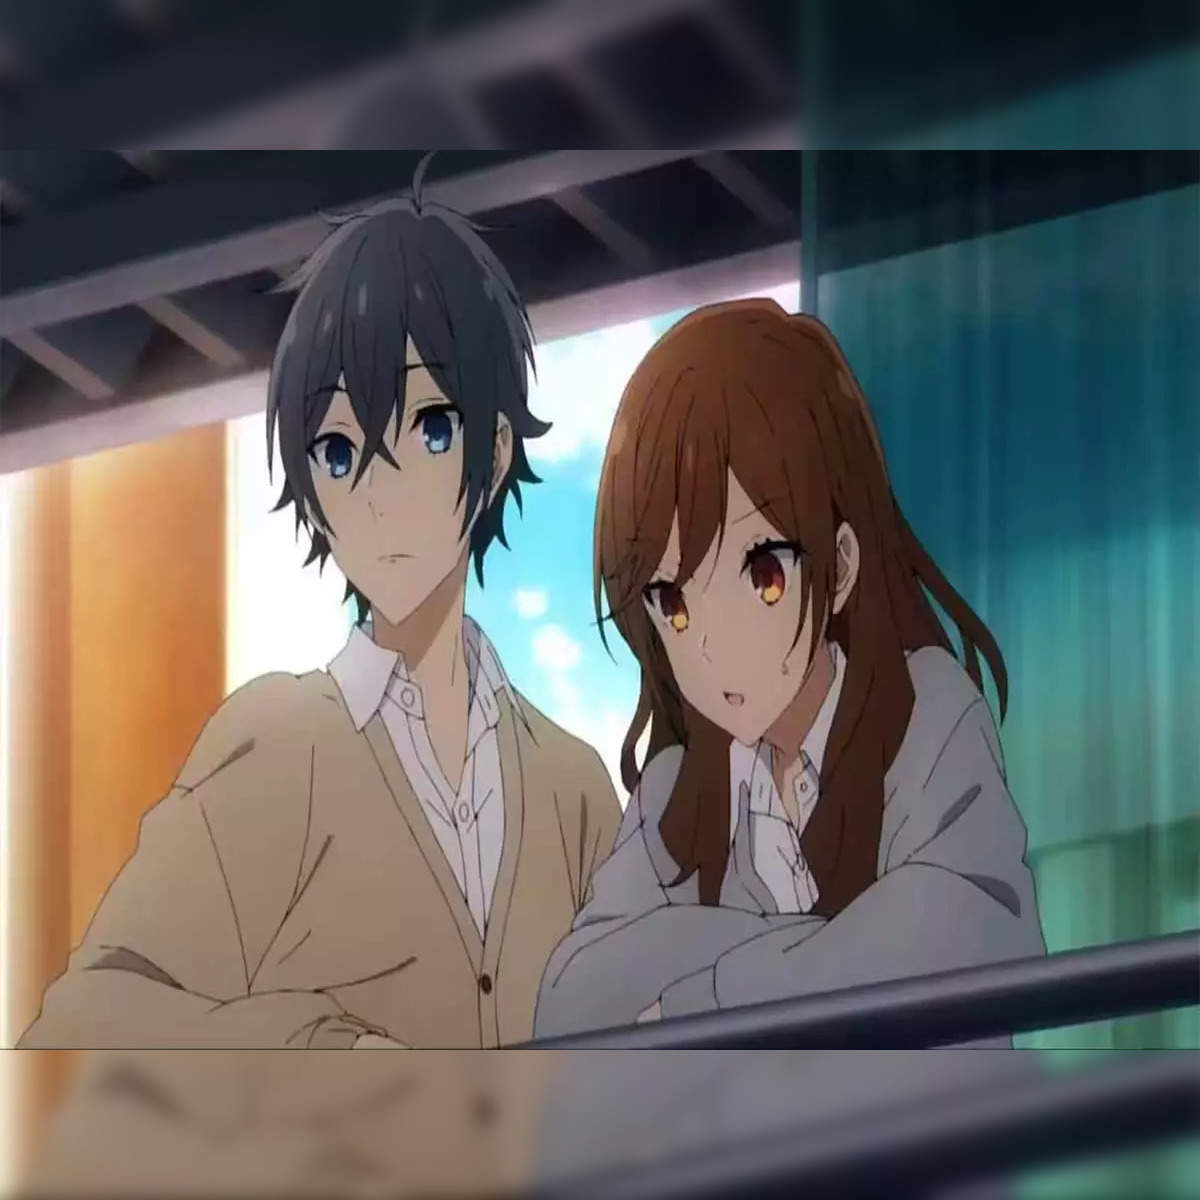 horimiya: Horimiya anime set to return with a new project this July. All  details here - The Economic Times